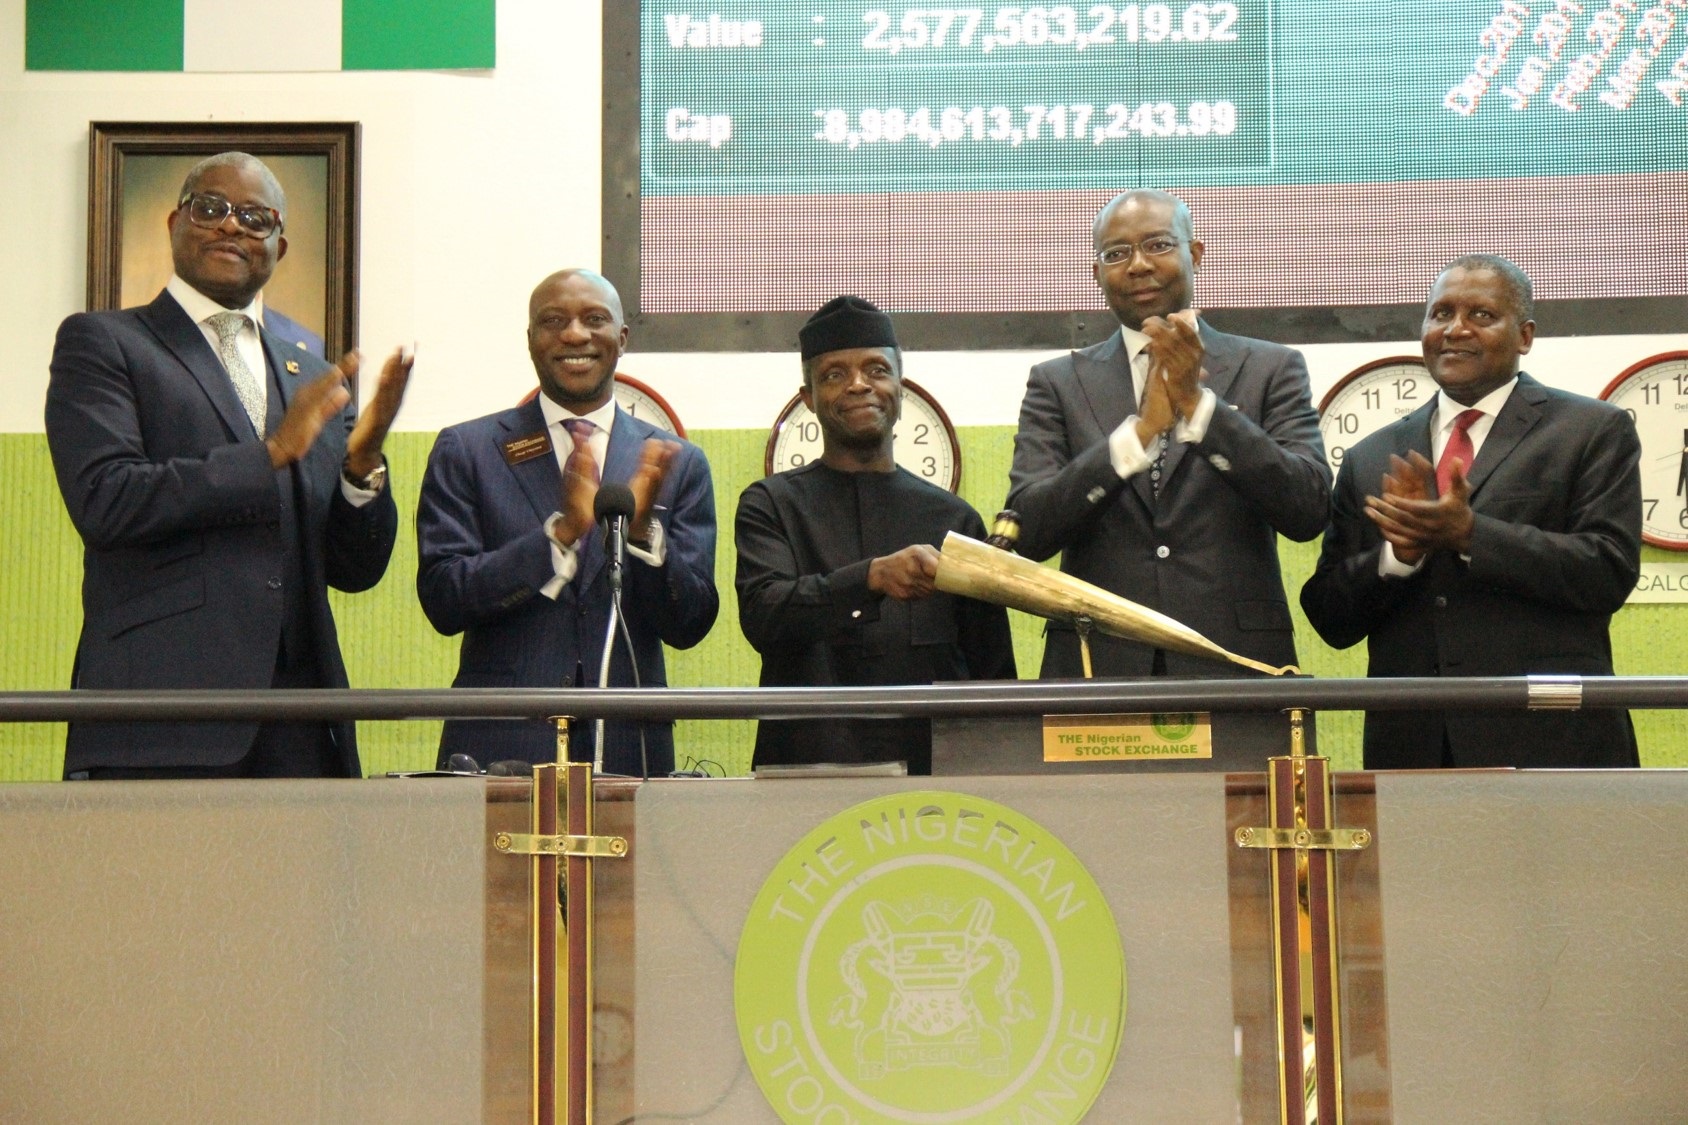 Together With Private Sector, We Can Take Nigeria To Prosperity – VP Osinbajo